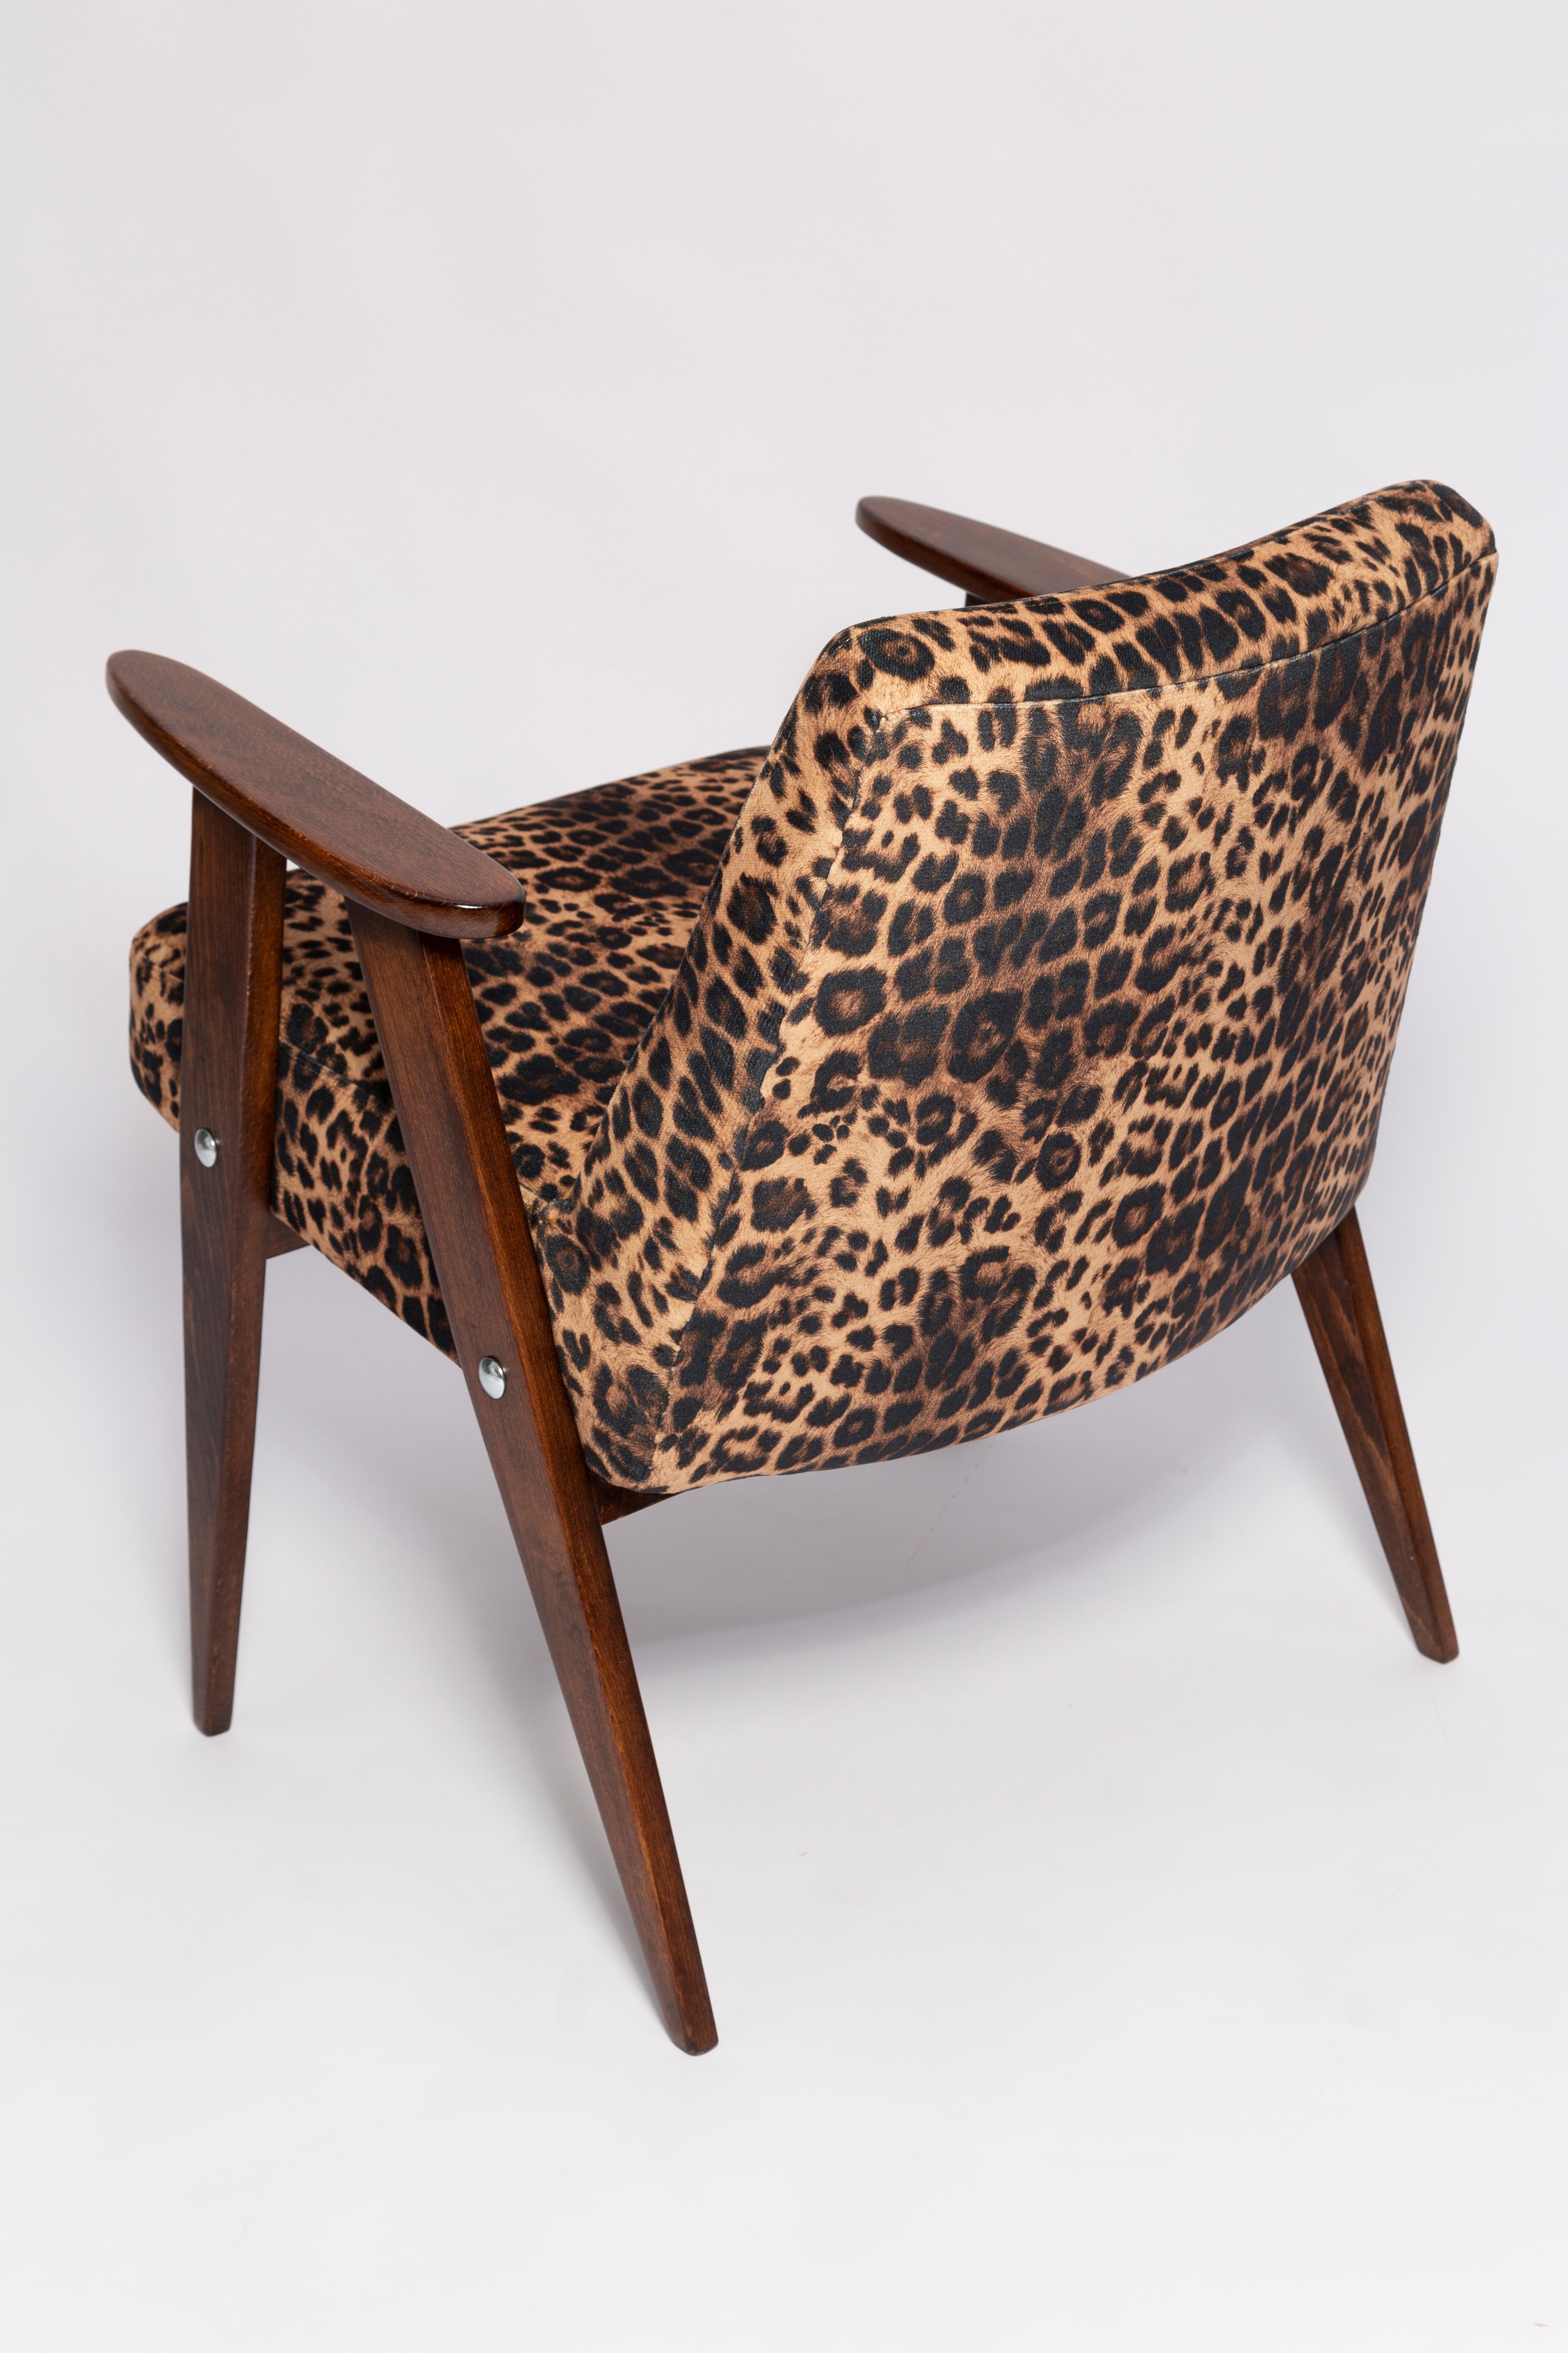 Two Midcentury 366 Armchairs in Leopard Print Velvet, Jozef Chierowski, 1960s For Sale 5